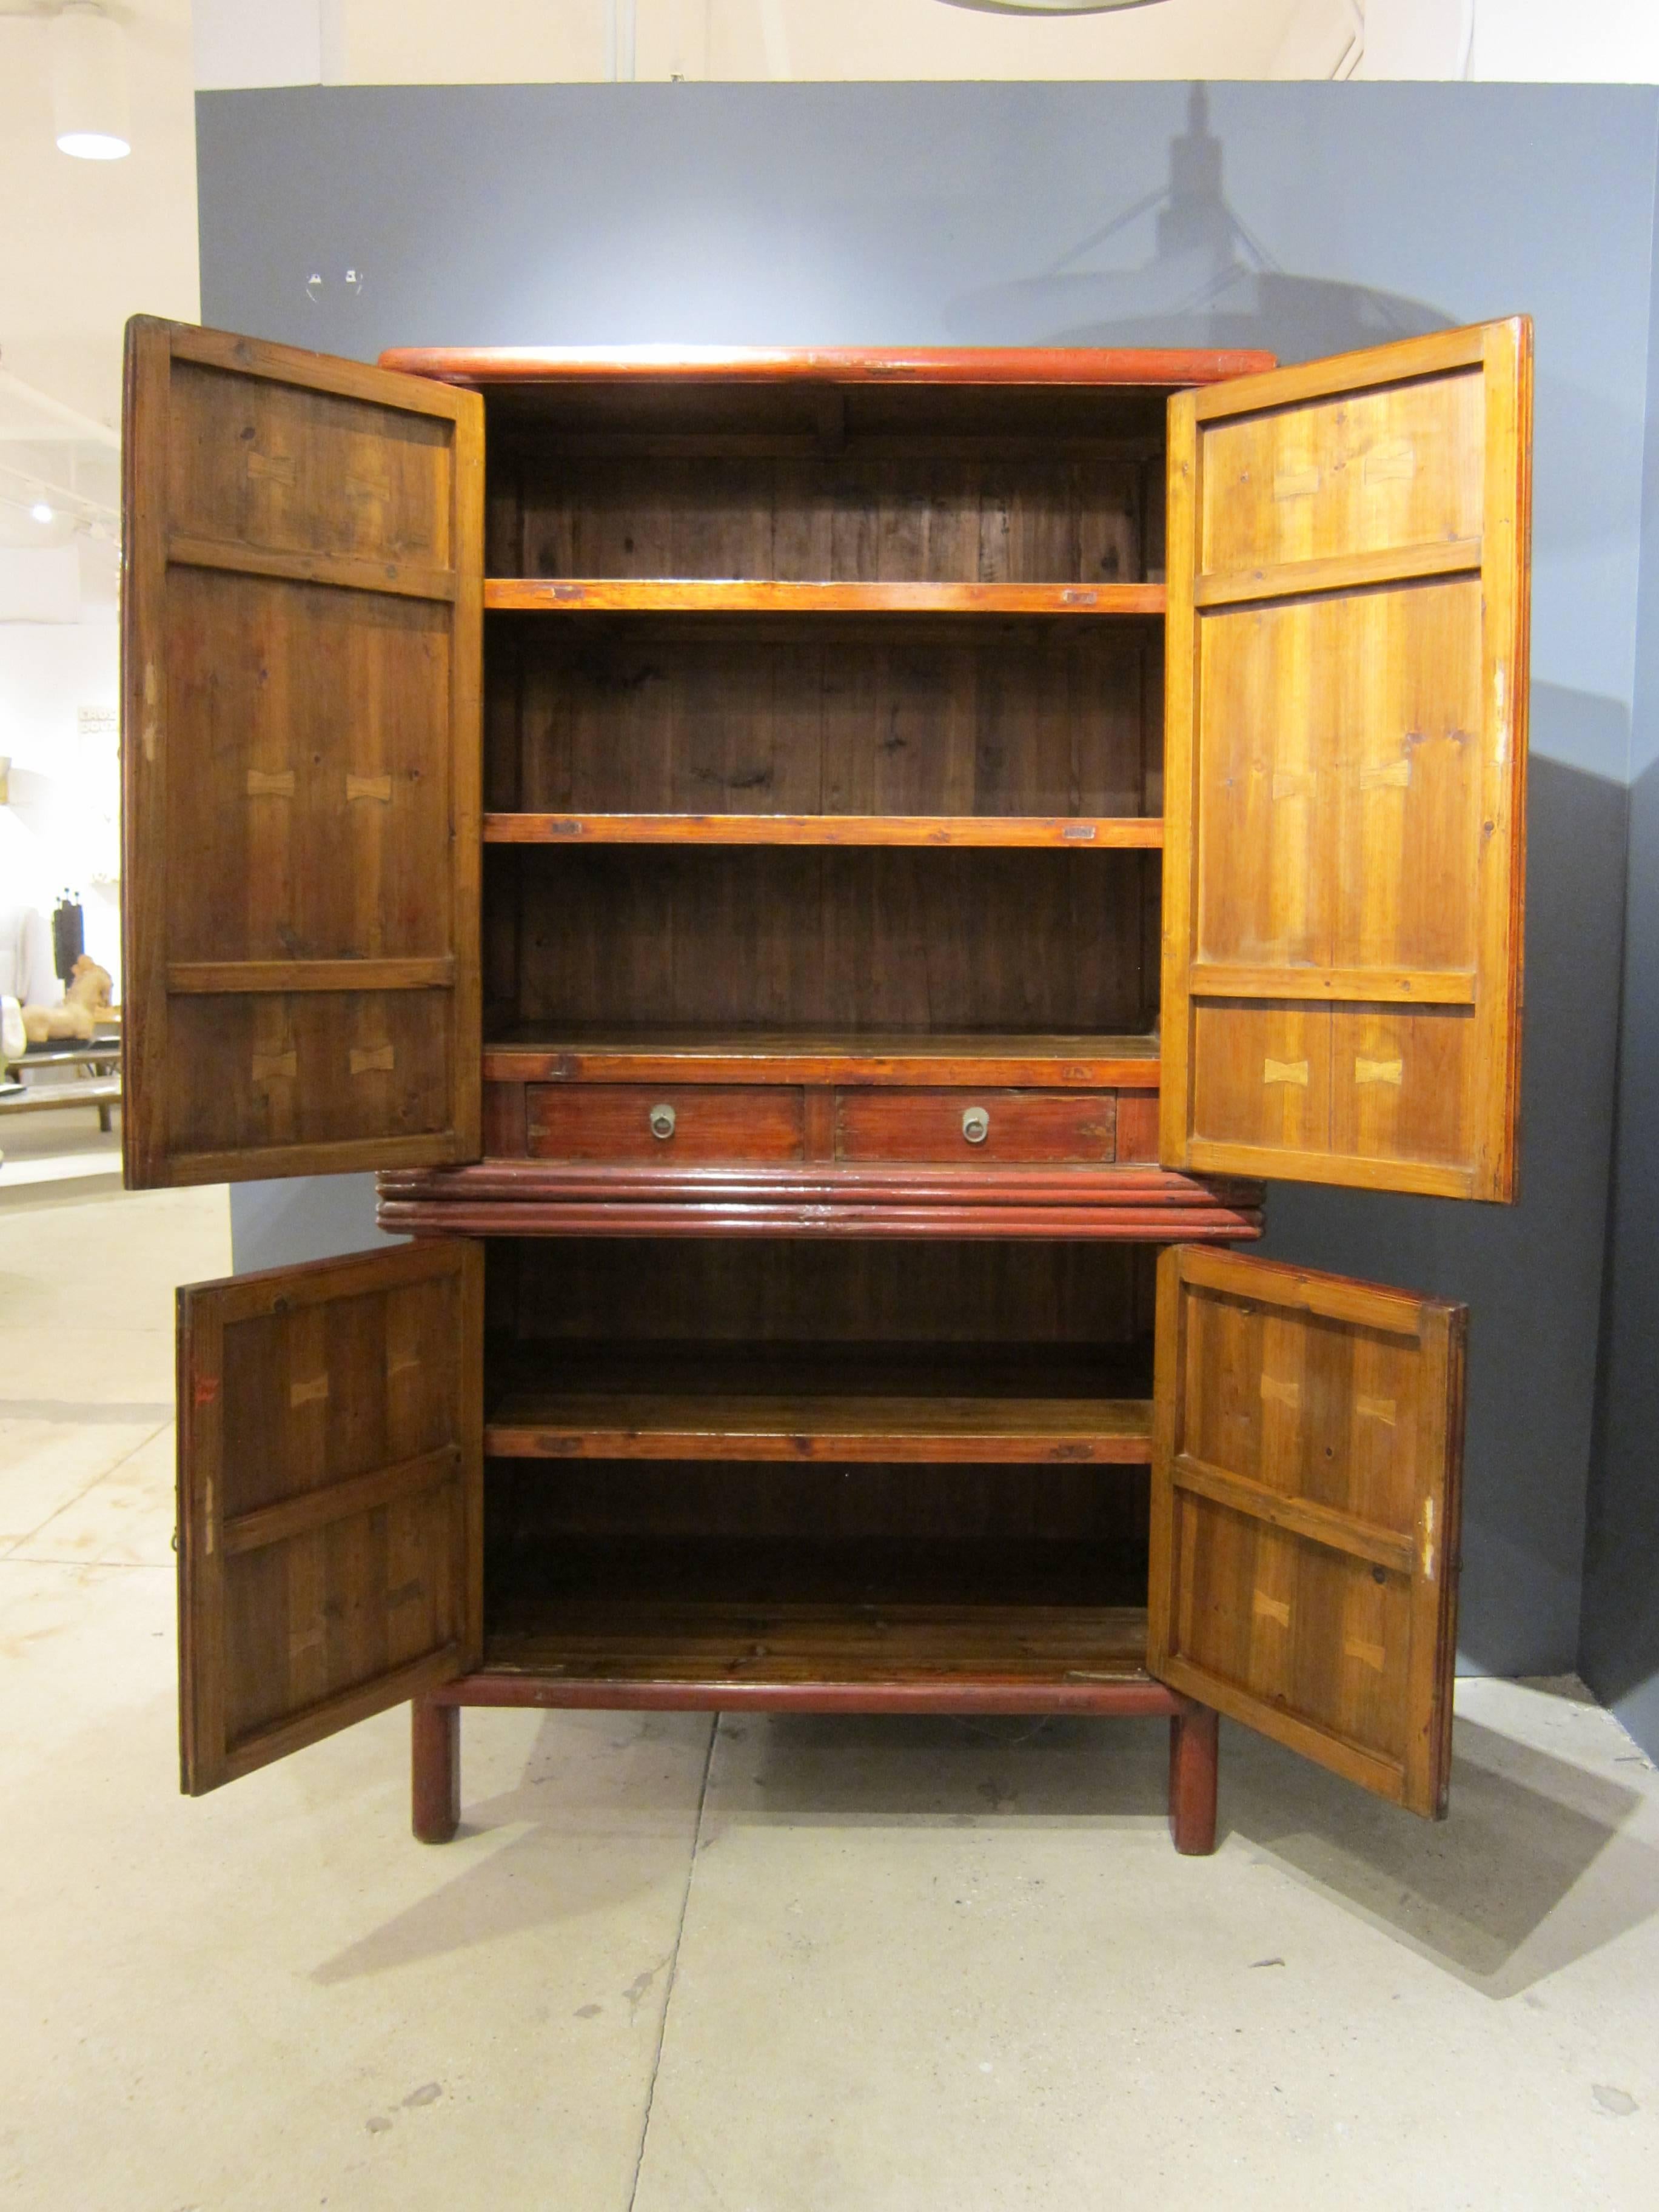 19th century two part Chinese tapered cabinet Armoire cedar / cypress wood with red lacquer panel doors, two drawers with five shelf's. This large cedar cabinet comes apart for easy moving and placement. Condition is excellent very good condition